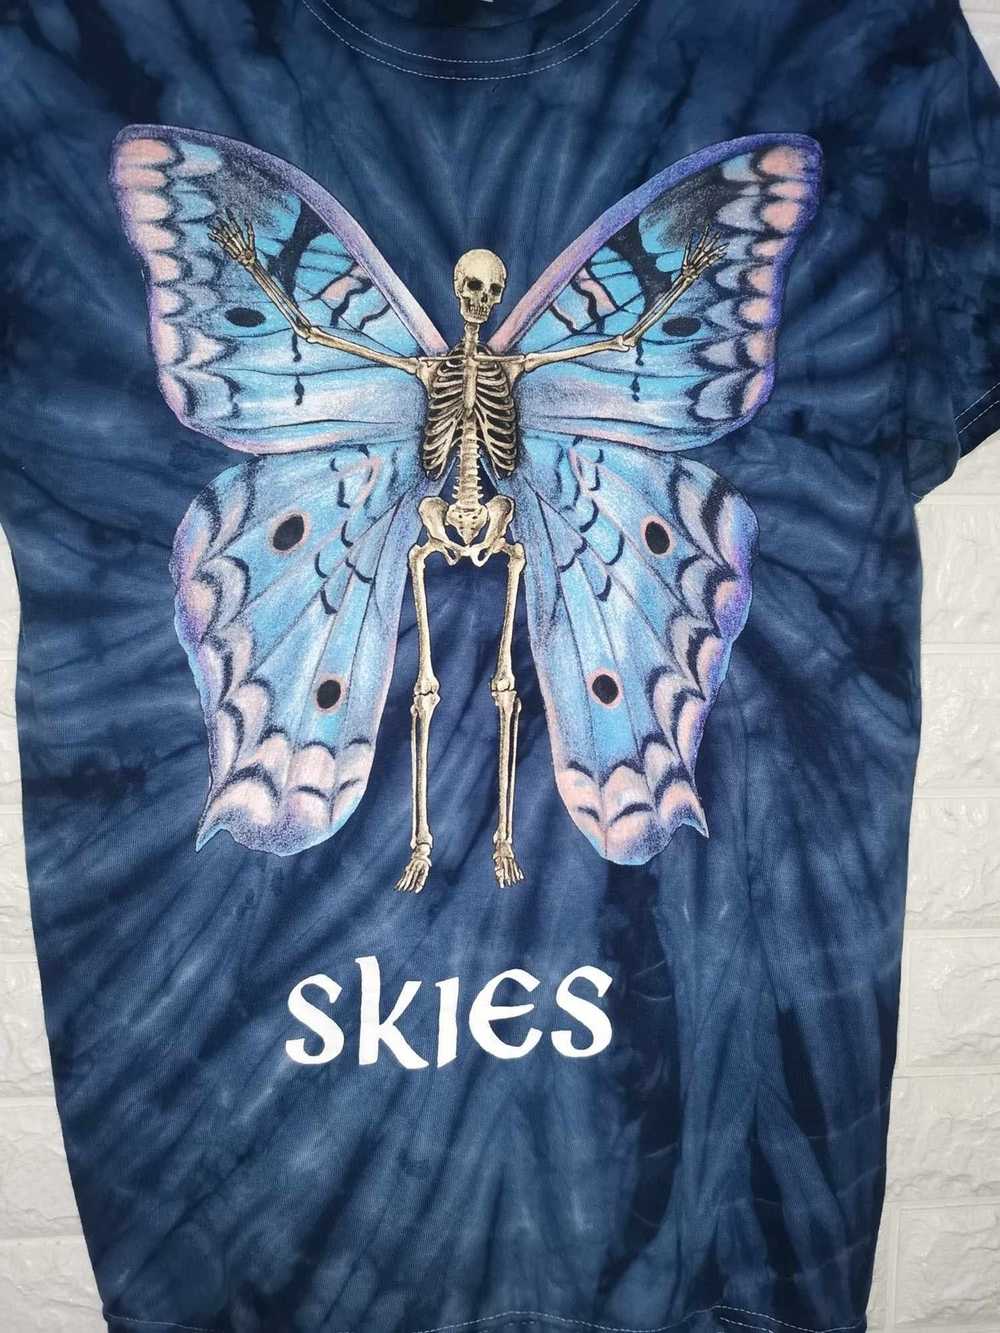 Tour Tee Lil Skies Shelby Tour T-Shirt - image 2